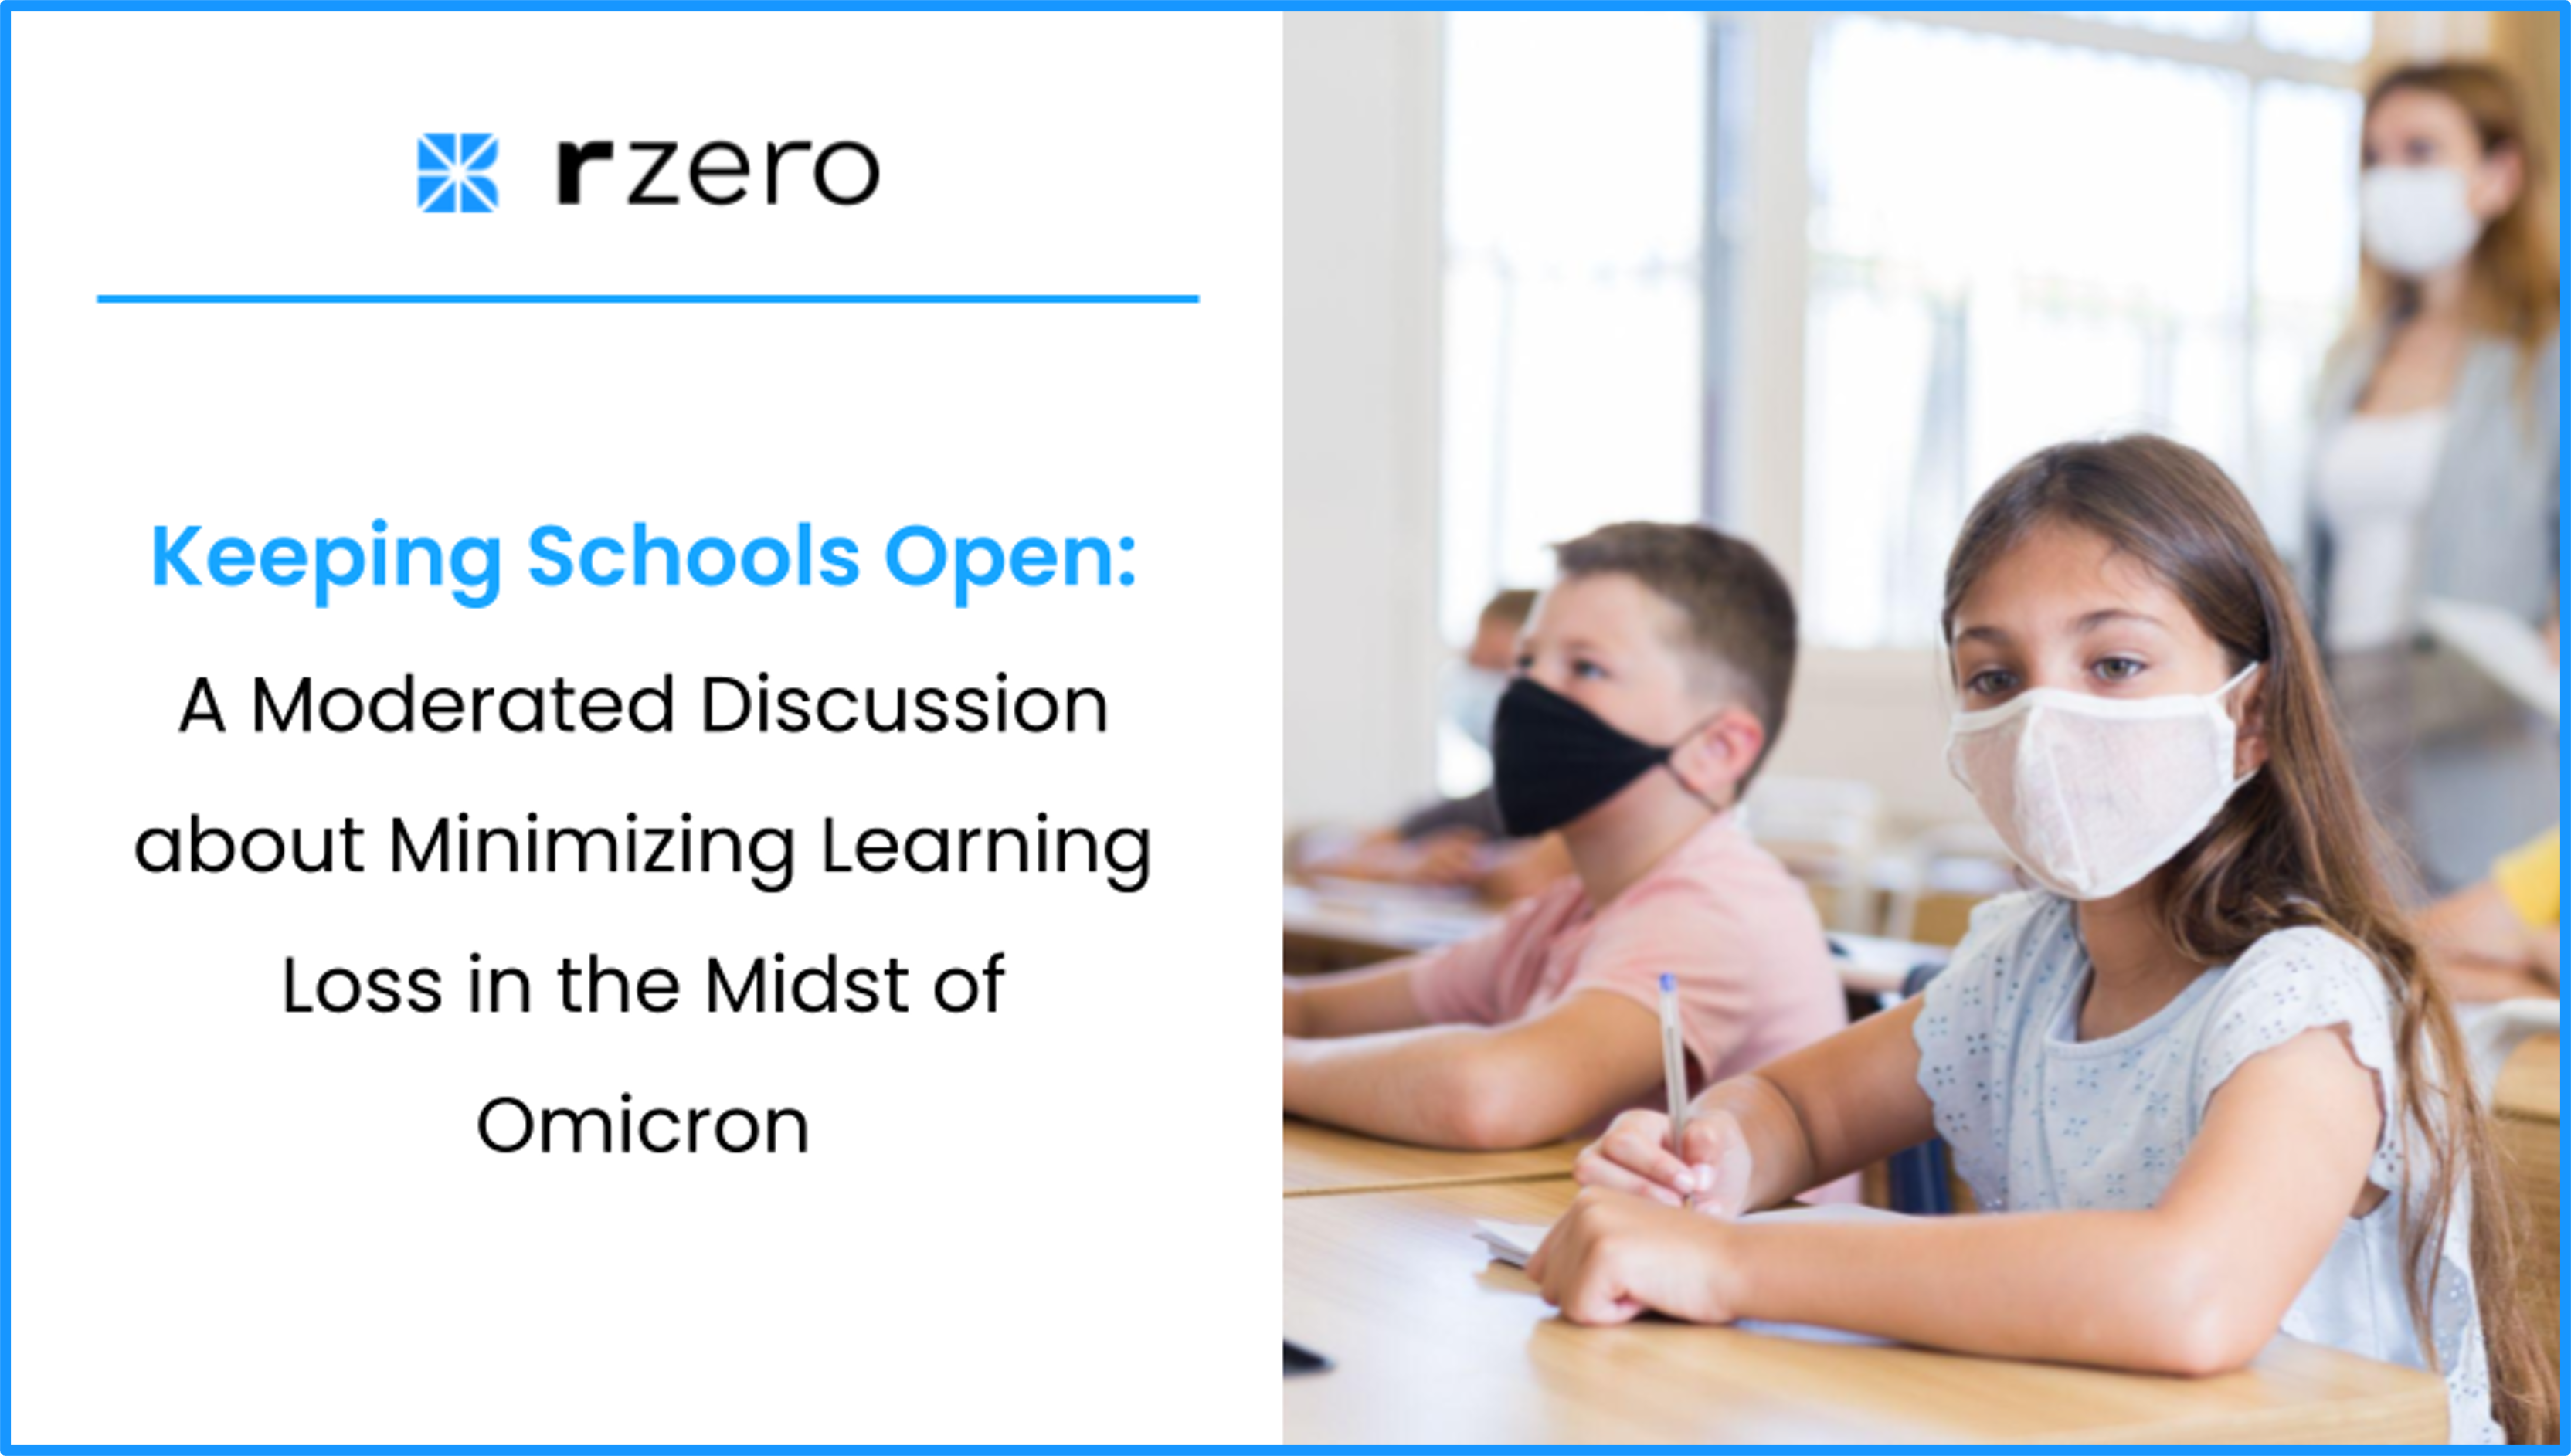 "Keeping Schools Open" banner with a little girl wearing a mask in a classroom while holding a pen.